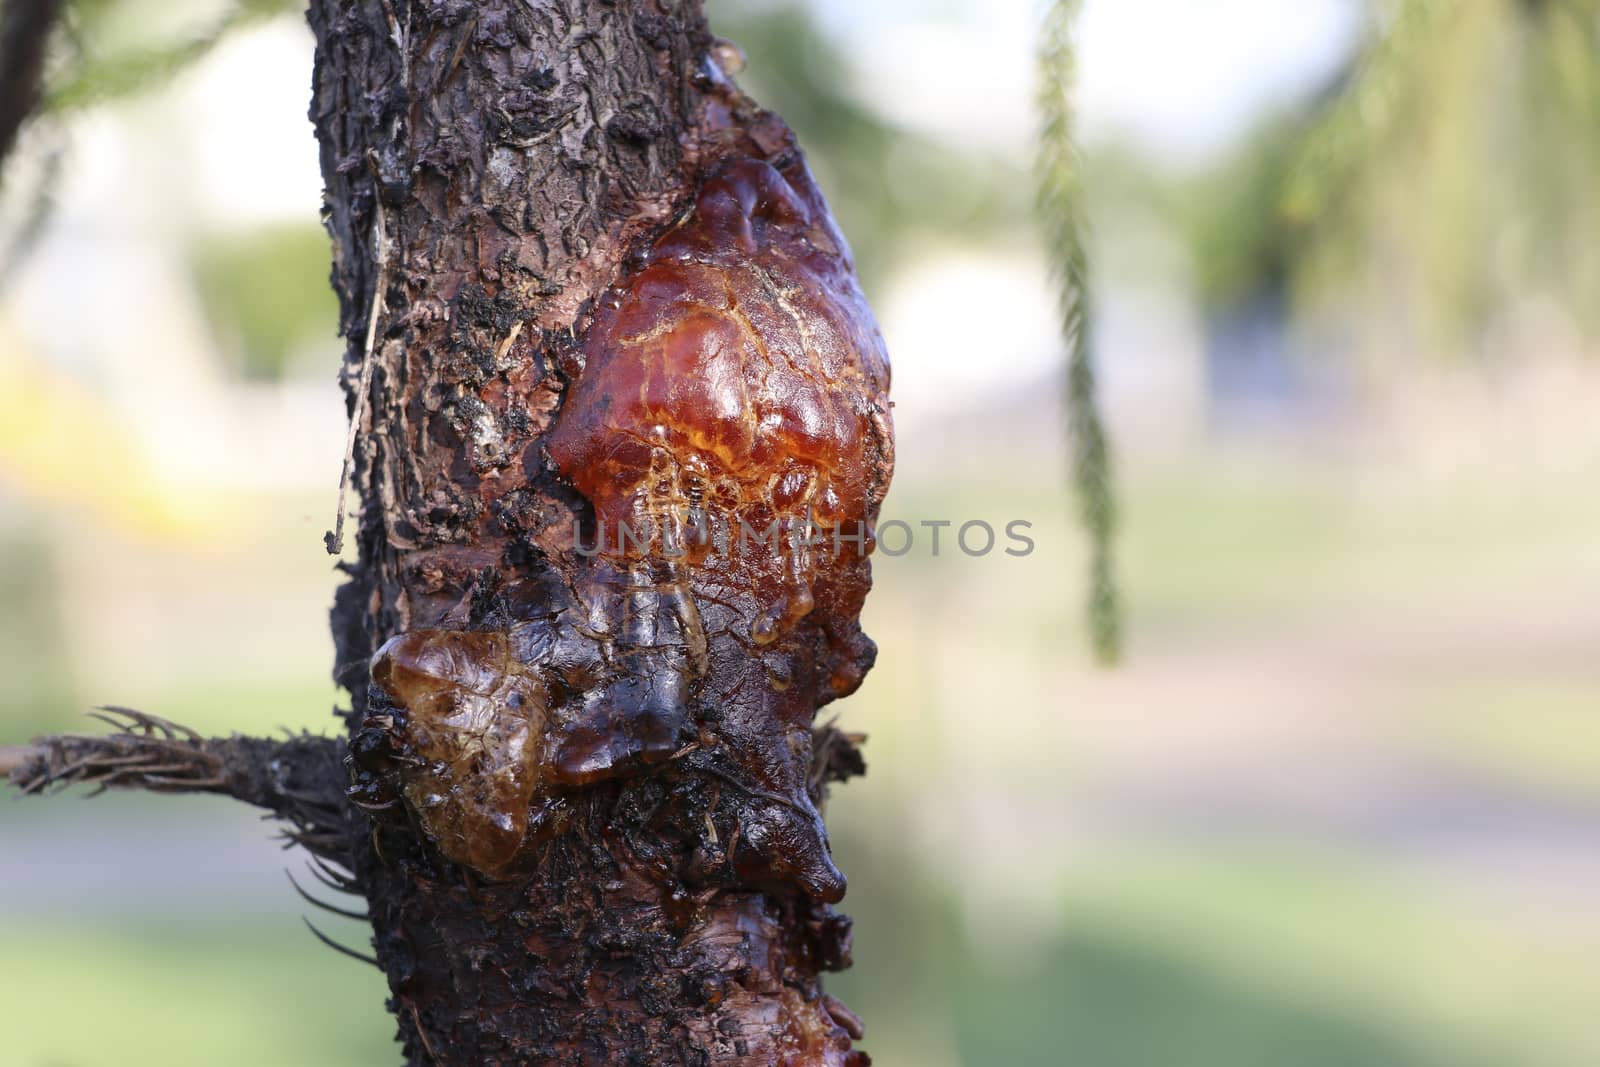 The resin of pine trees flows from the wound on the side of the trunk. The amber liquid that flows from the pine tree.